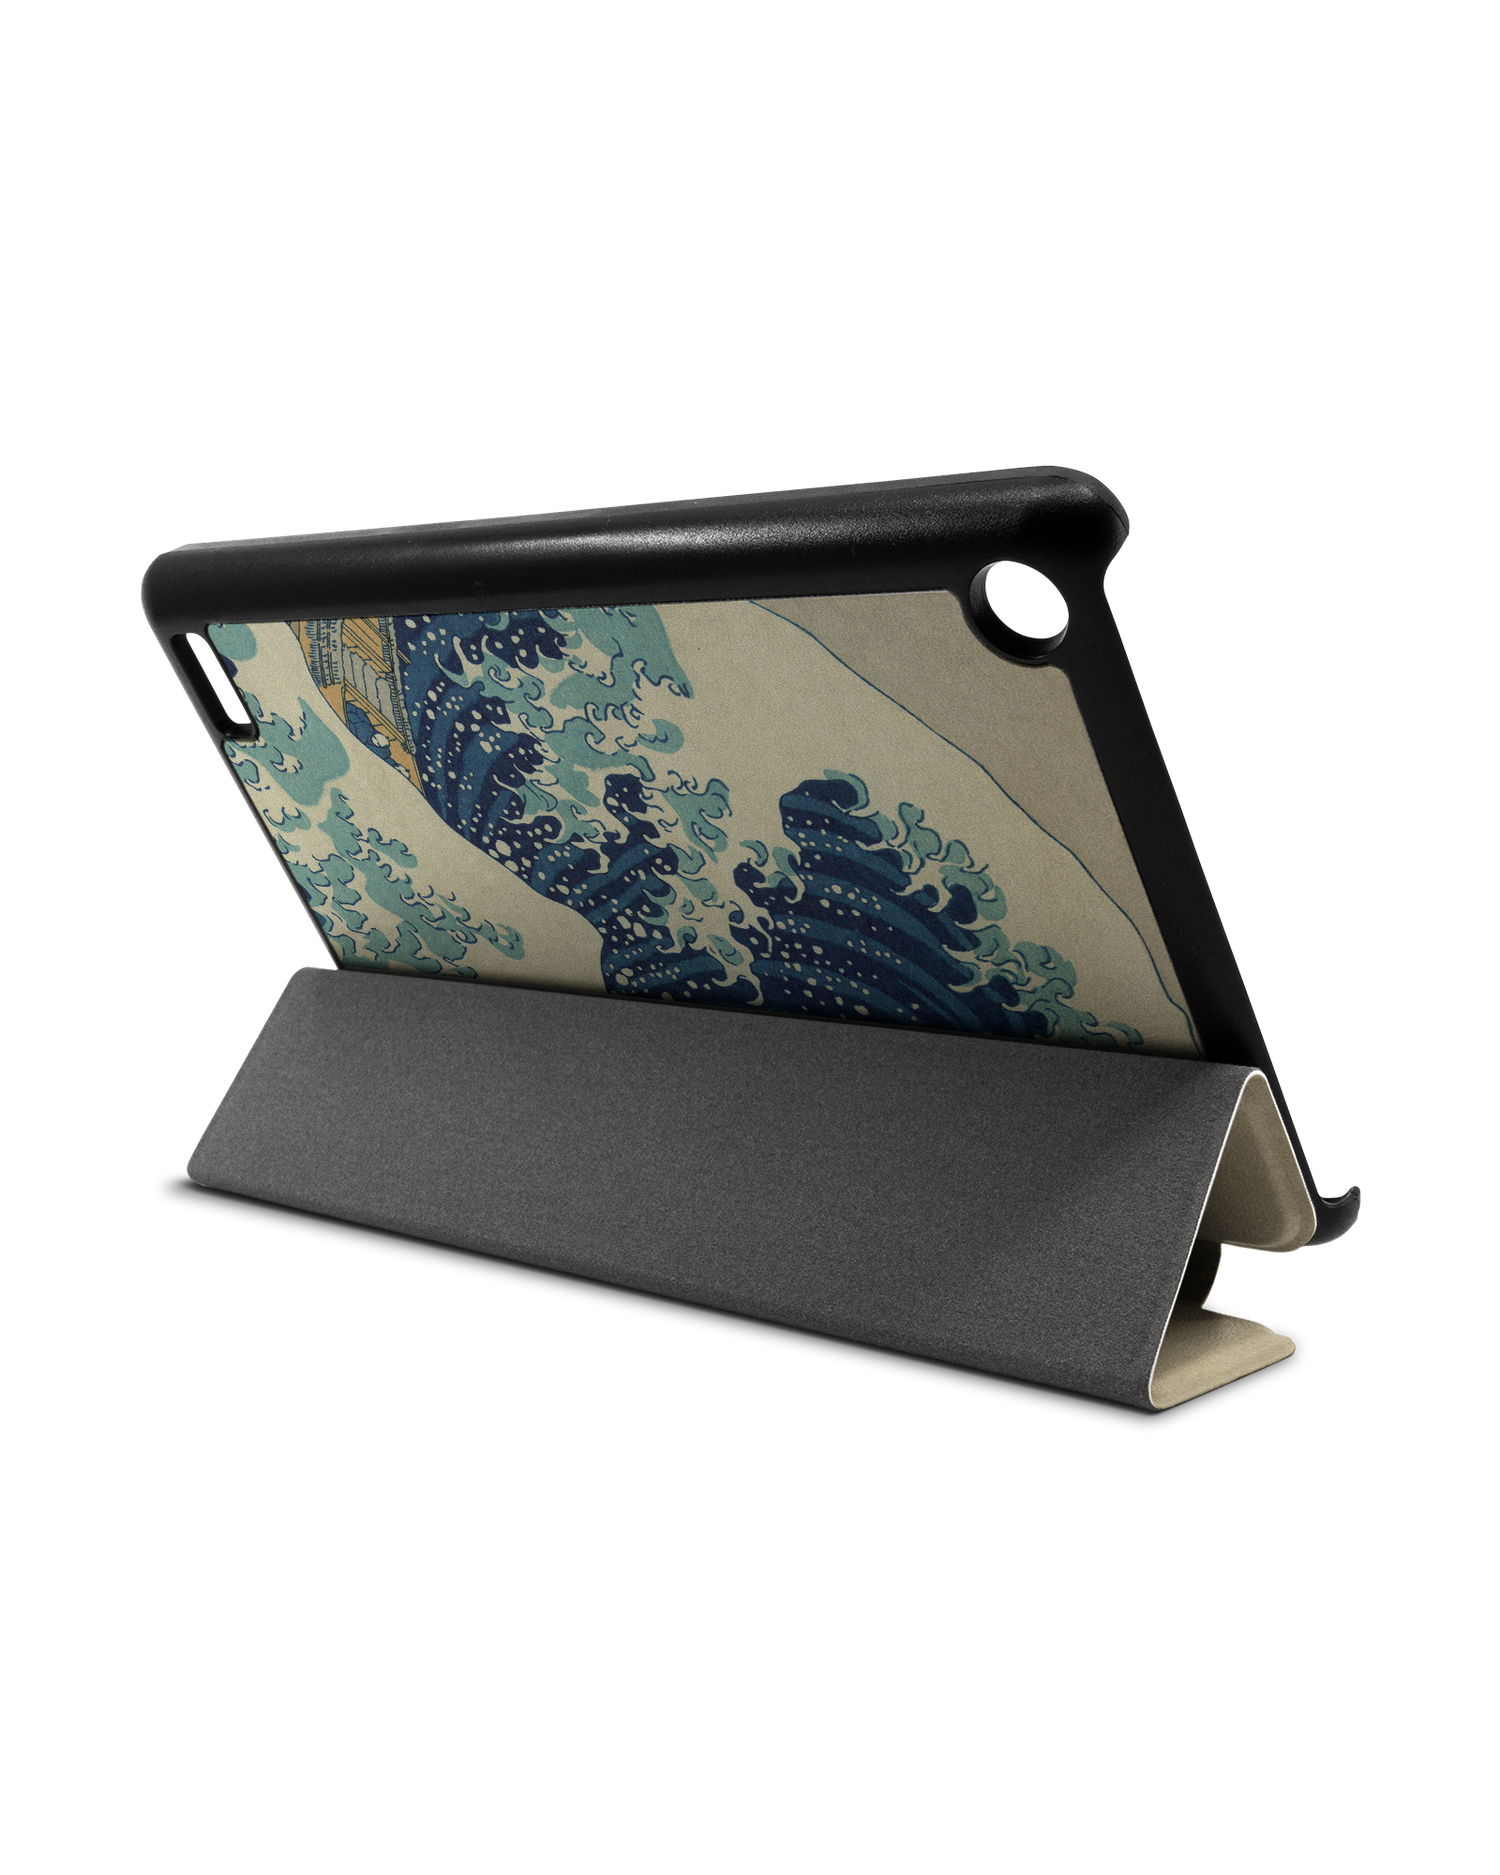 Great Wave Off Kanagawa By Hokusai Tablet Smart Case for Amazon Fire 7: Used as Stand